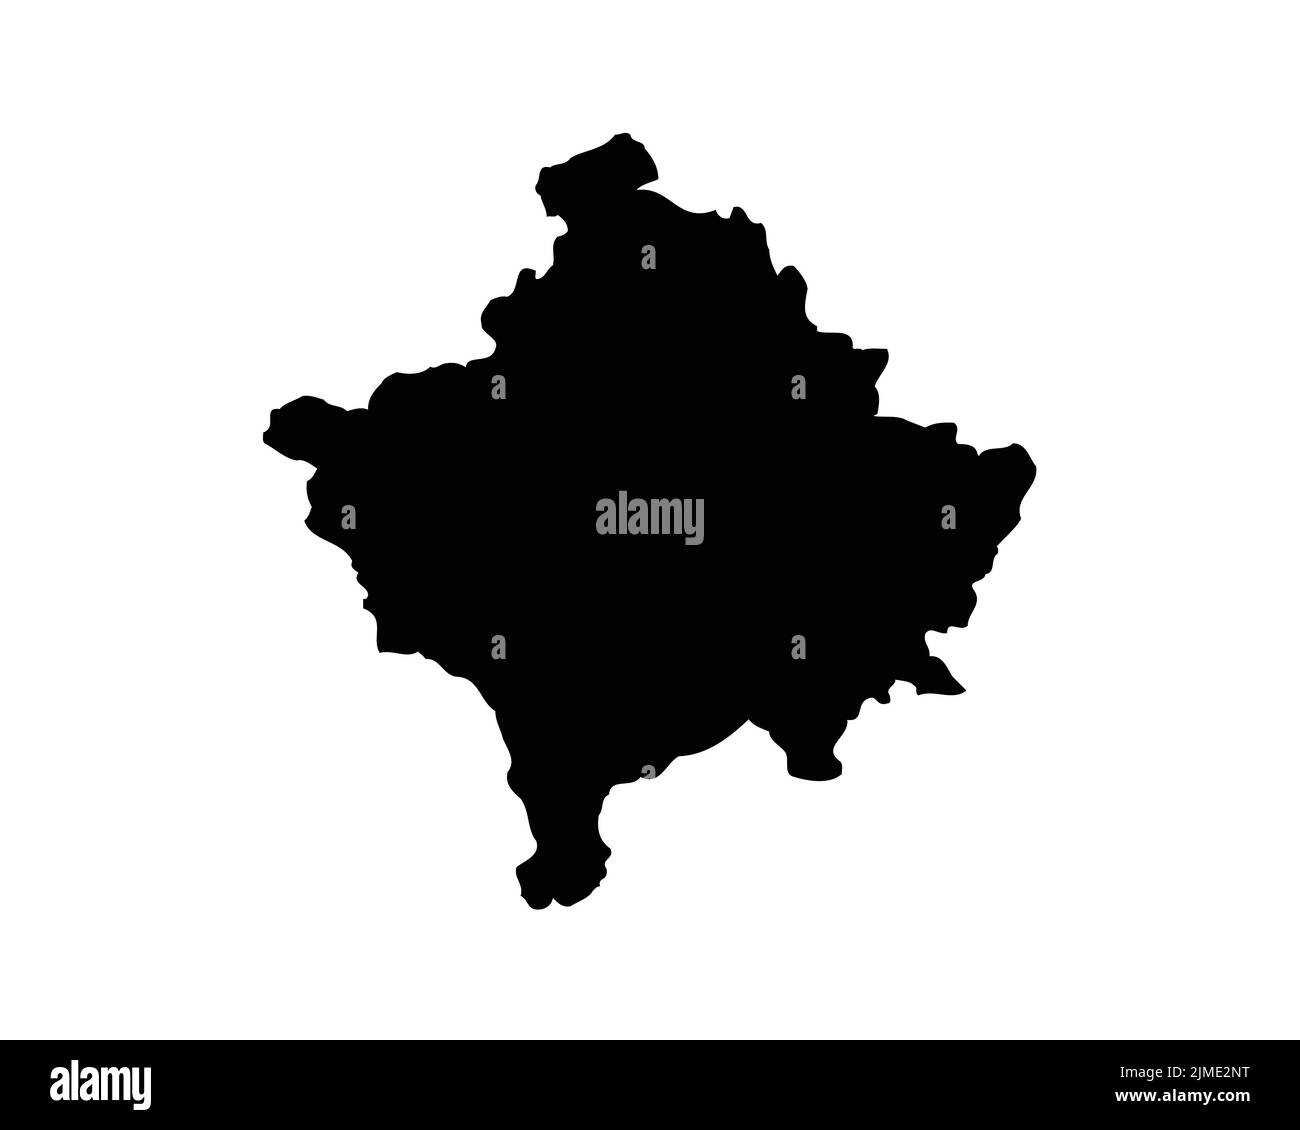 Kosovo Map. Kosovar Country Map. Black and White Kosovan National Nation Outline Geography Border Boundary Shape Territory Vector Illustration EPS Cli Stock Vector